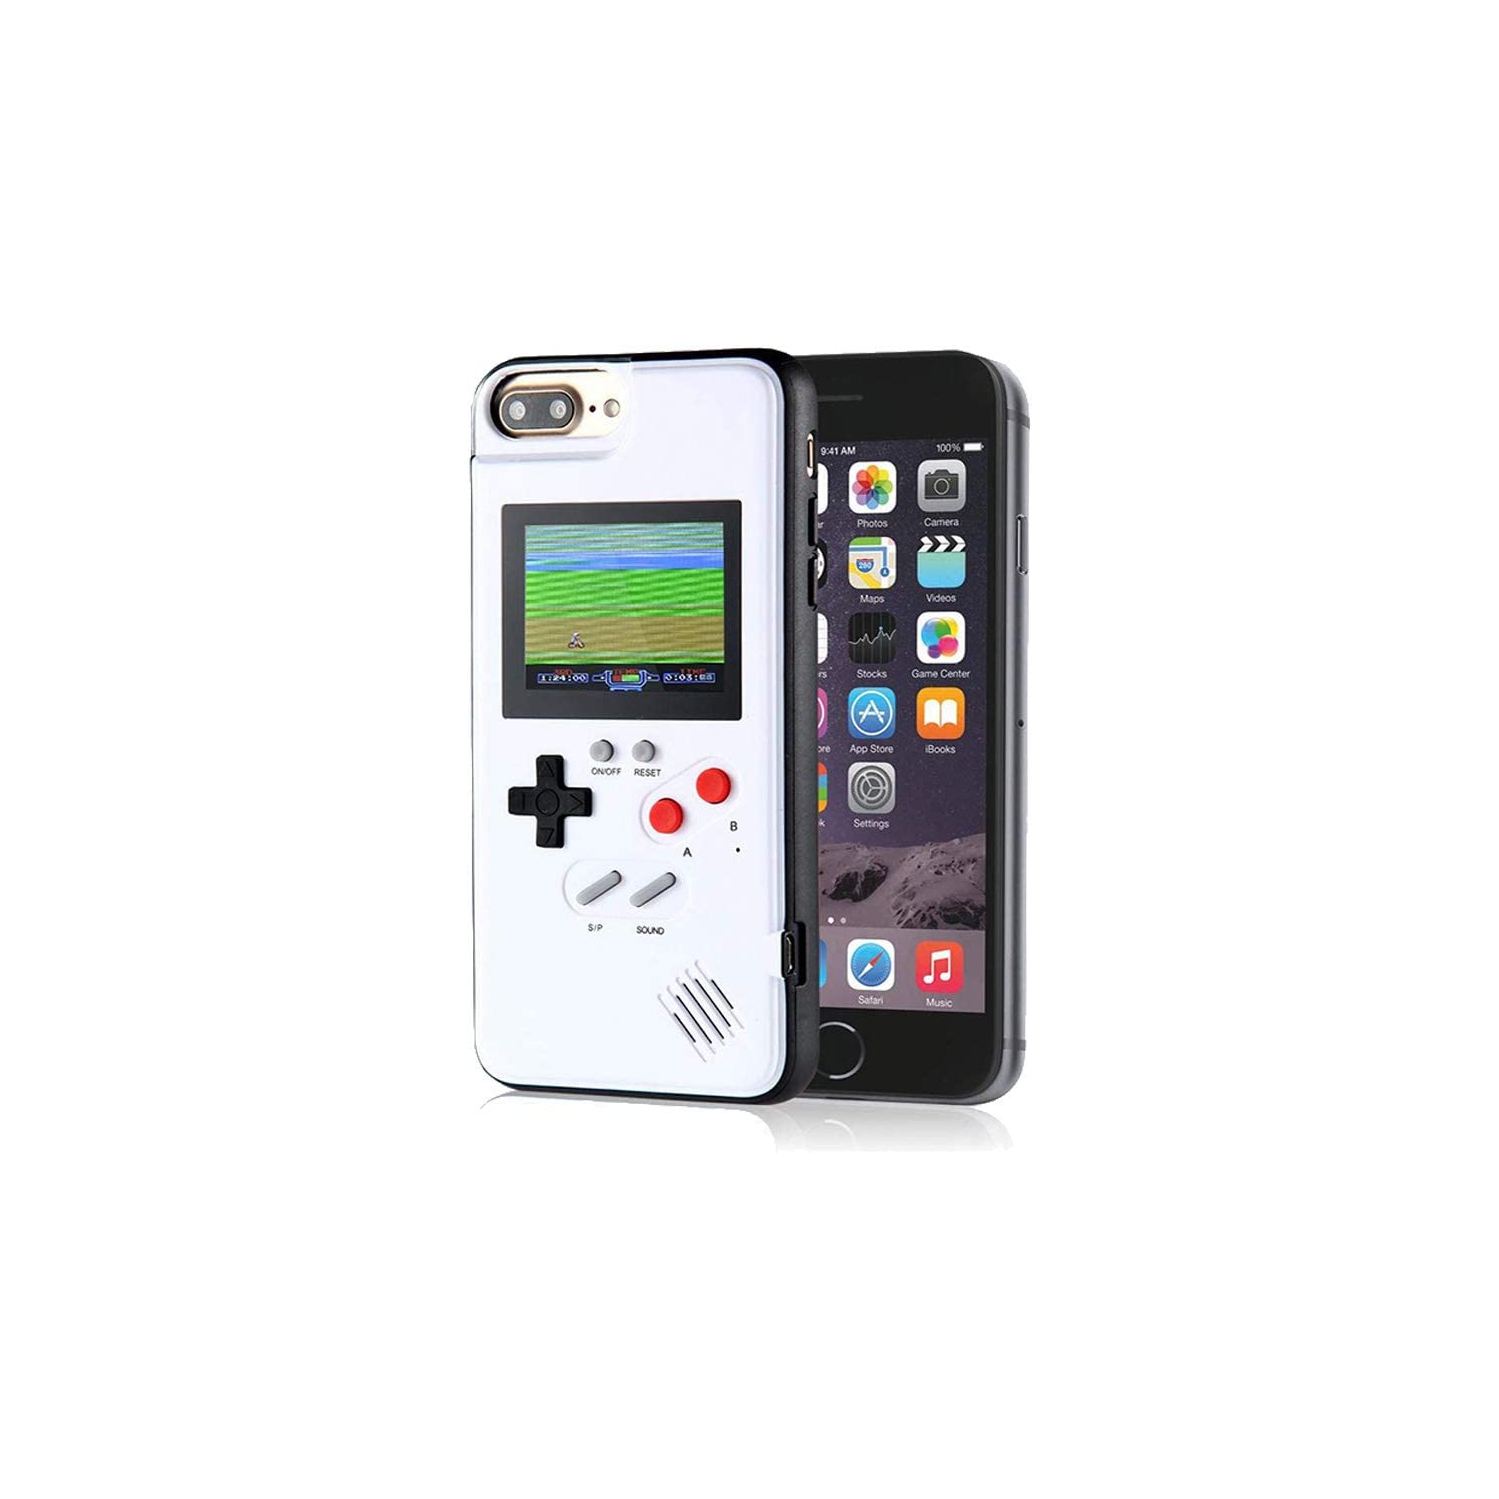 Game Console Case for iPhone 8, Shockproof Case with Video Games for iPhone 7, Color Display Retro Gameboy Case, Game Phone Case for iPhone 6/6S/7/8, White